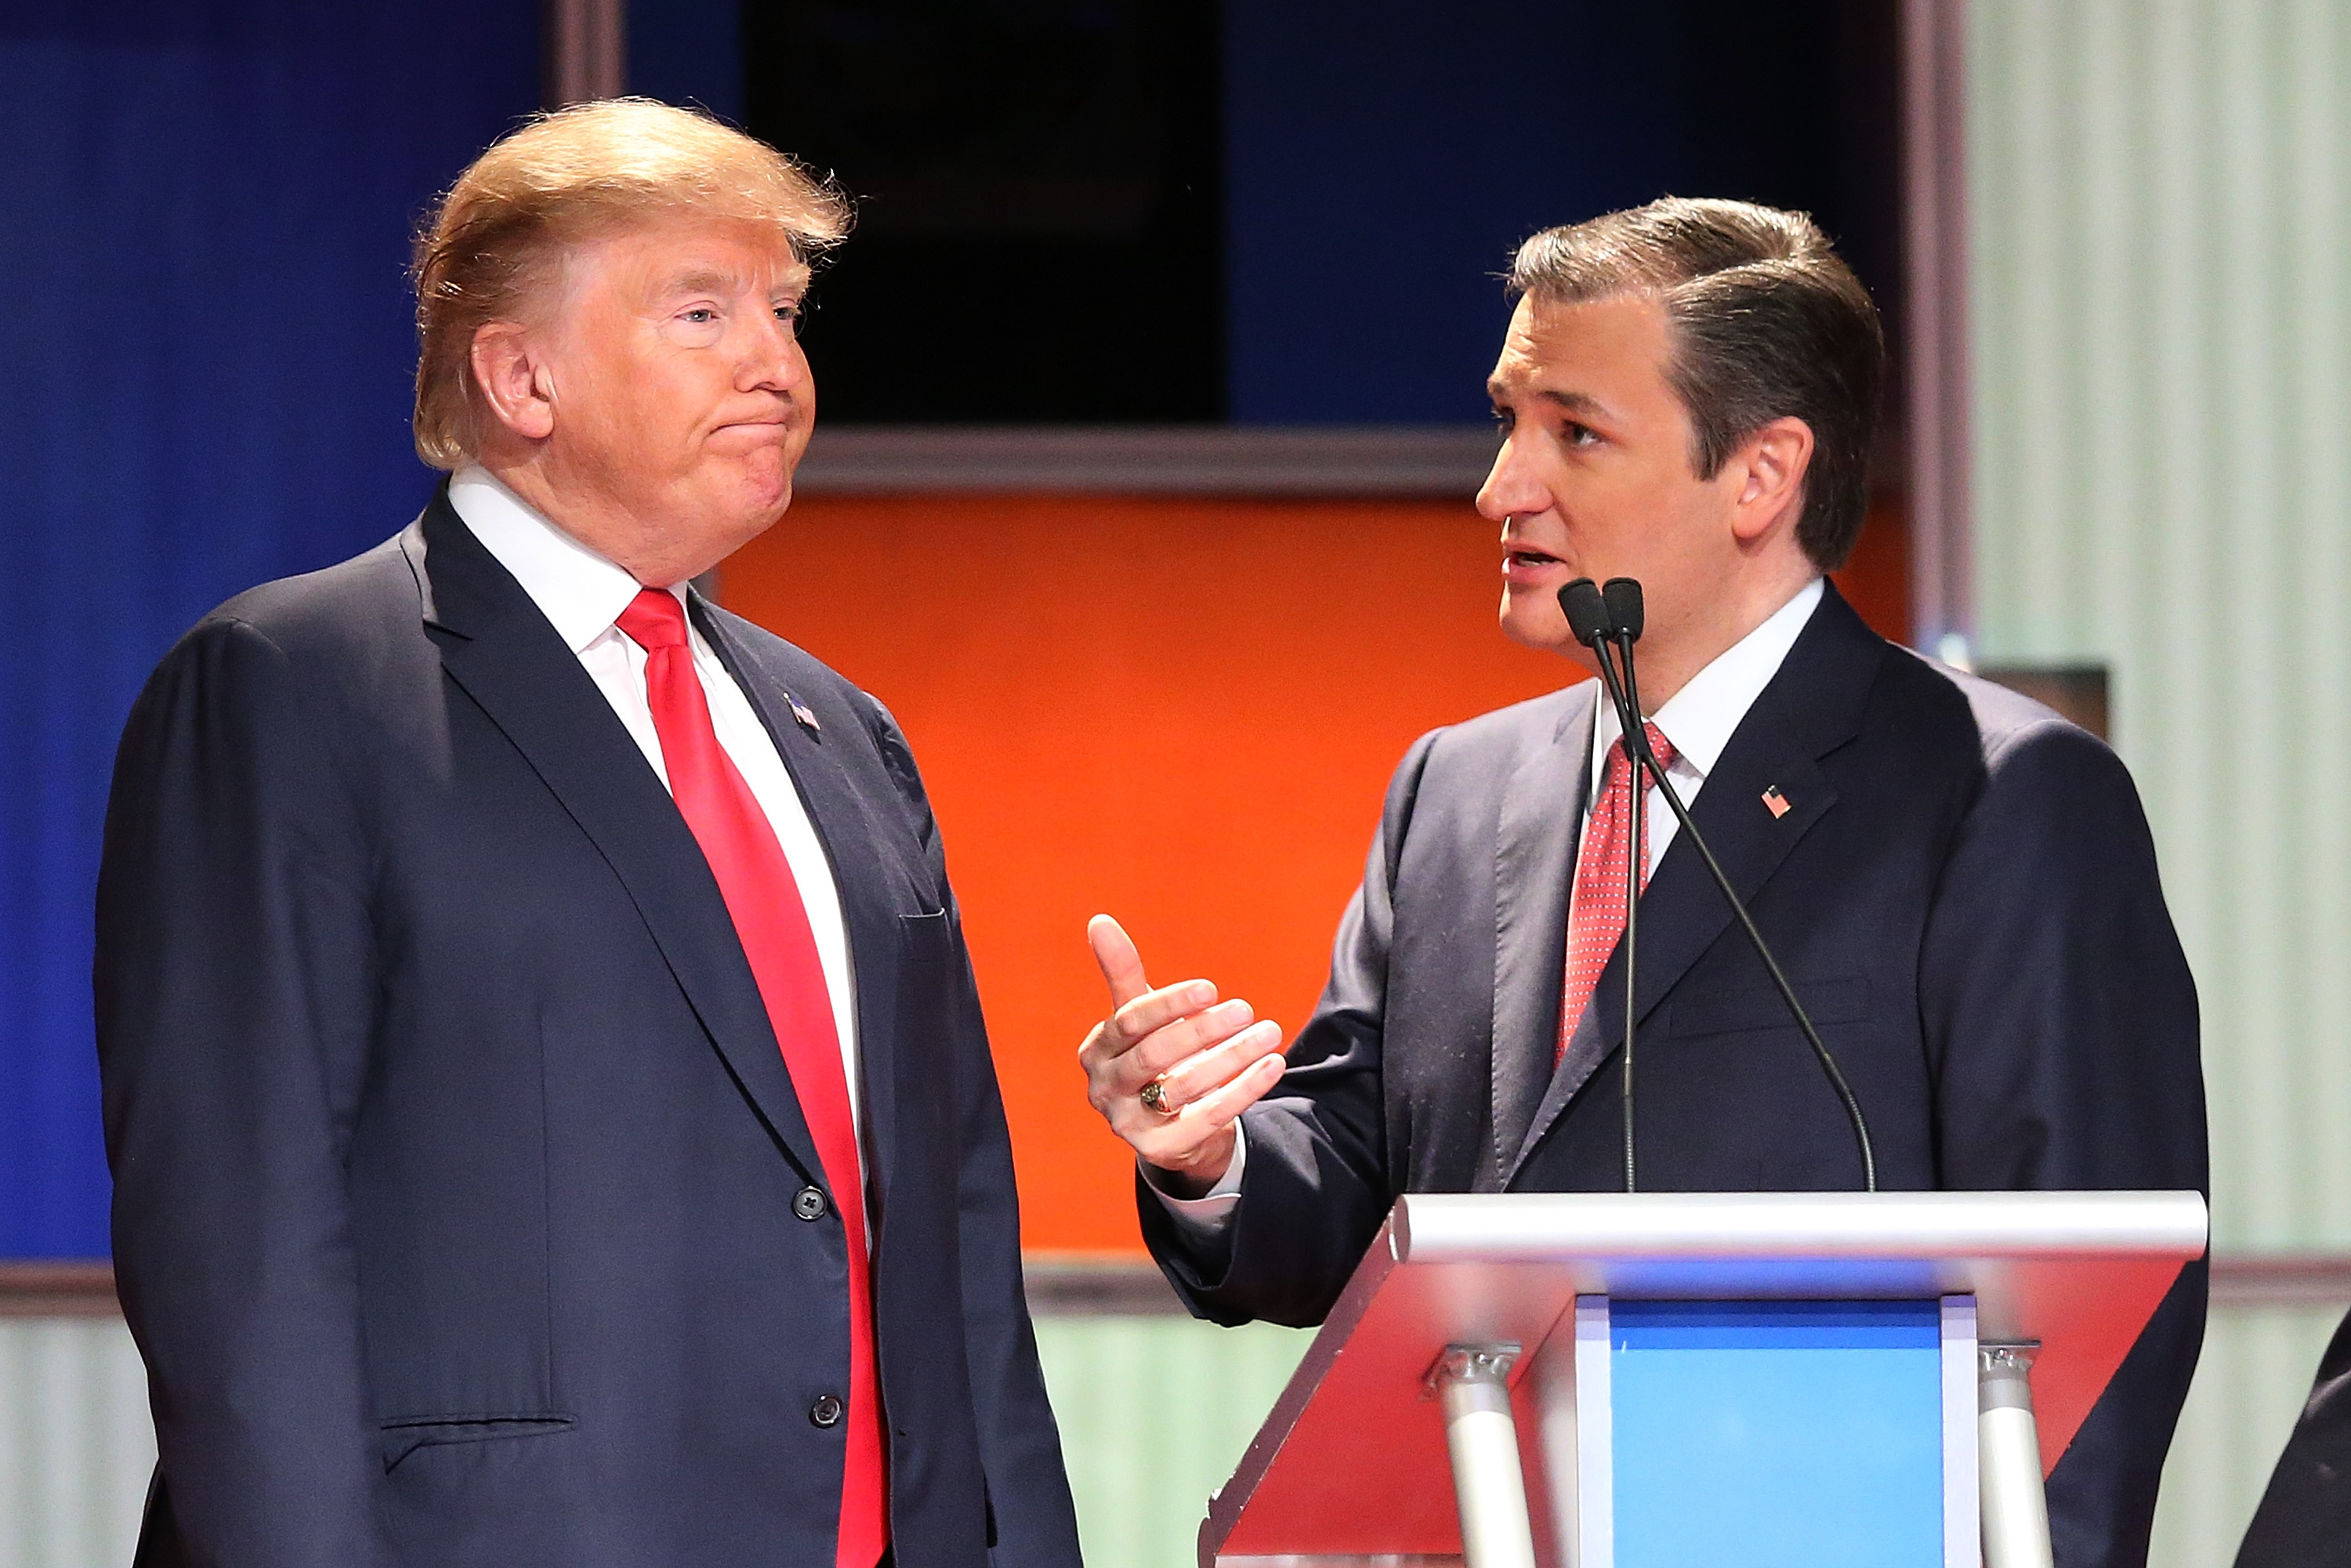 Donald Trump and Ted Cruz speak during a commercial break in a presidential debate in South Carolina, on Jan. 14, 2016. (Scott Olson—Getty Images)